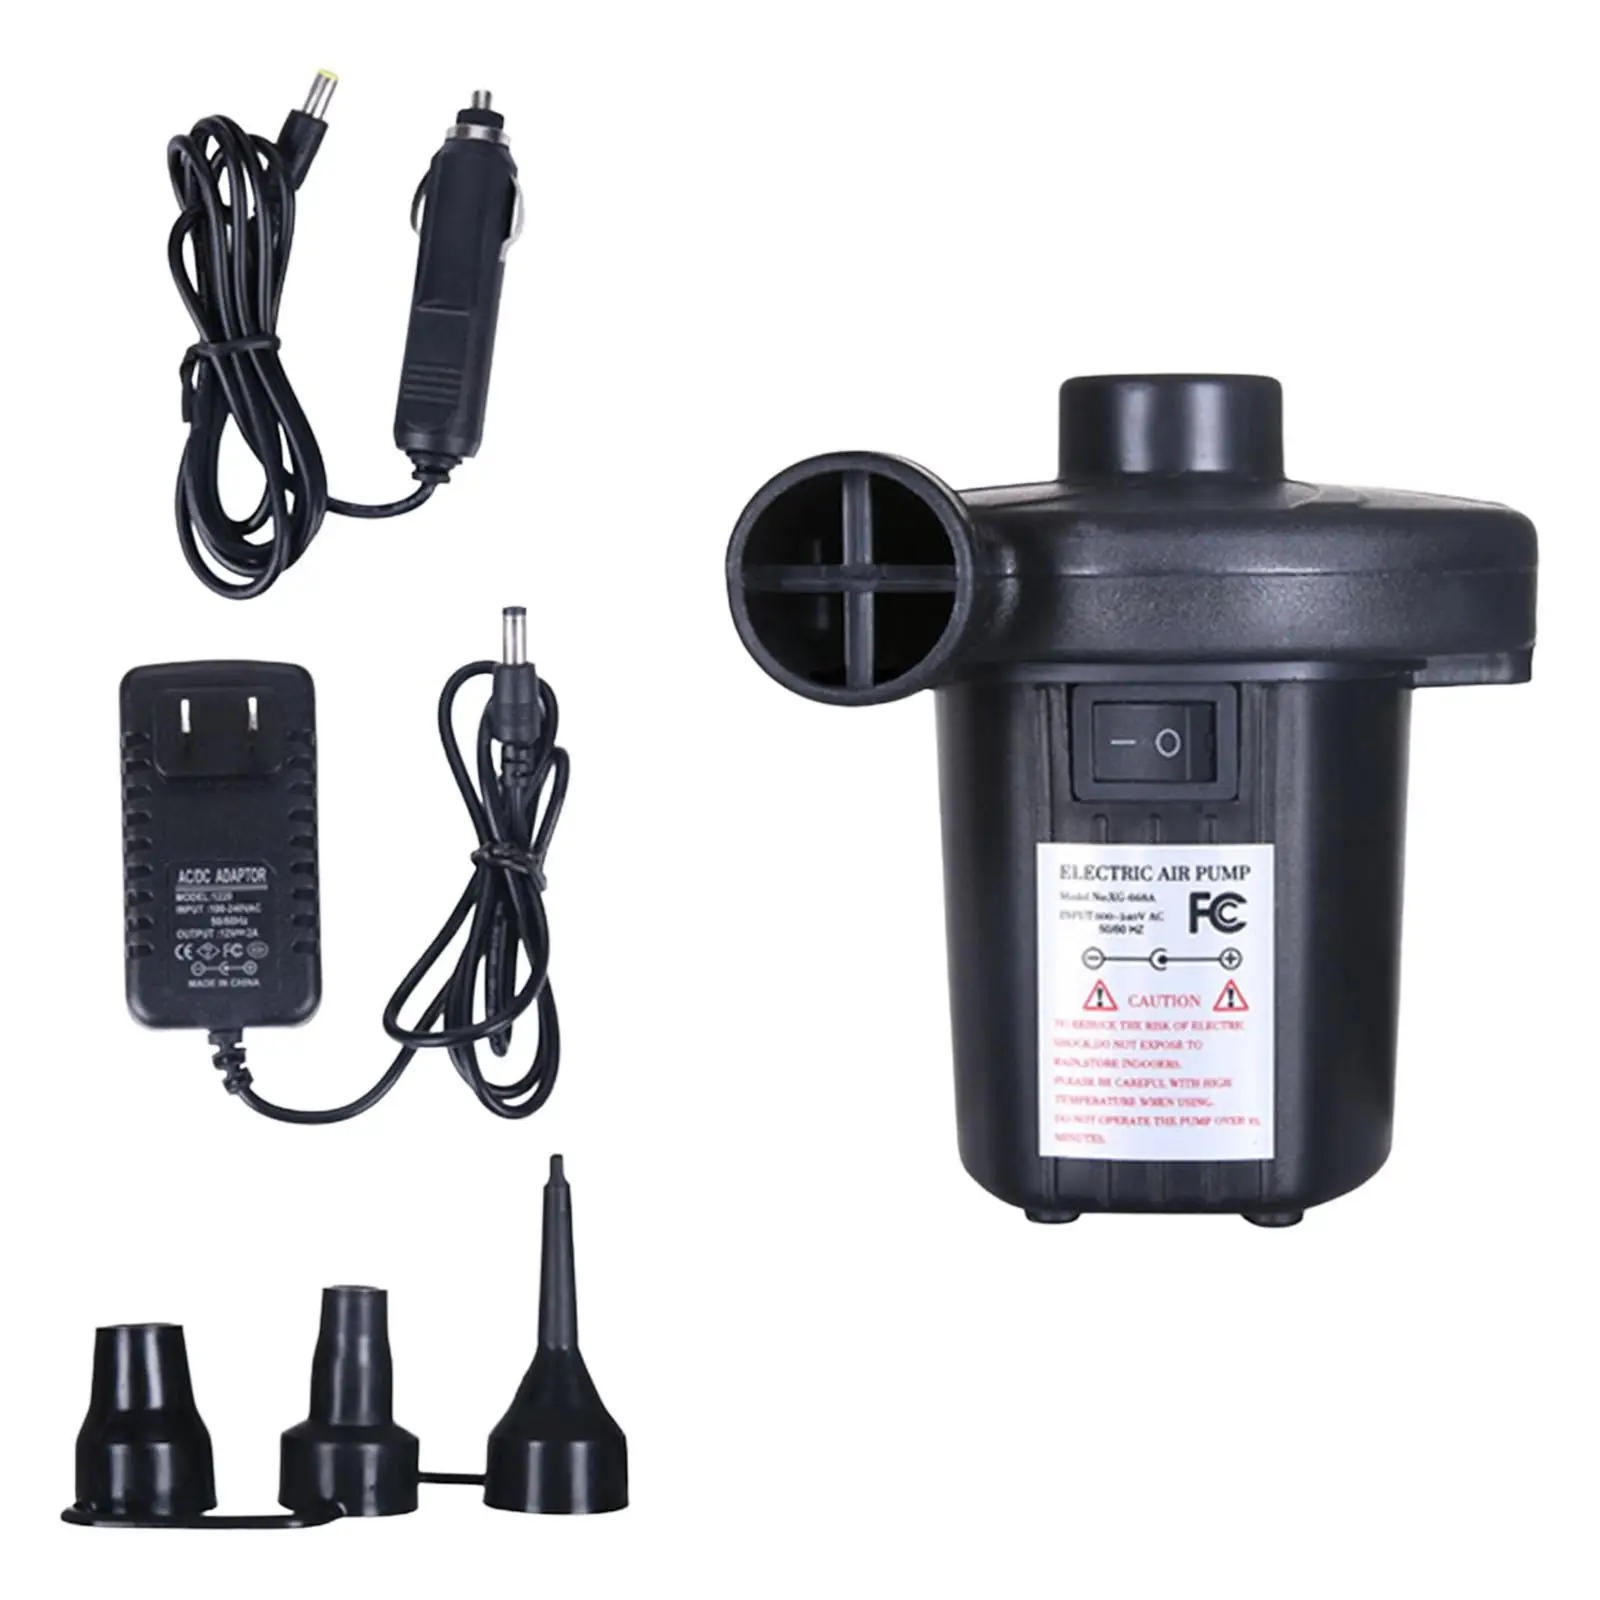 Electric Air Pump Air Mattress Pump with 3 Heads Nozzle for Inflatables Air Beds Outdoor Camping